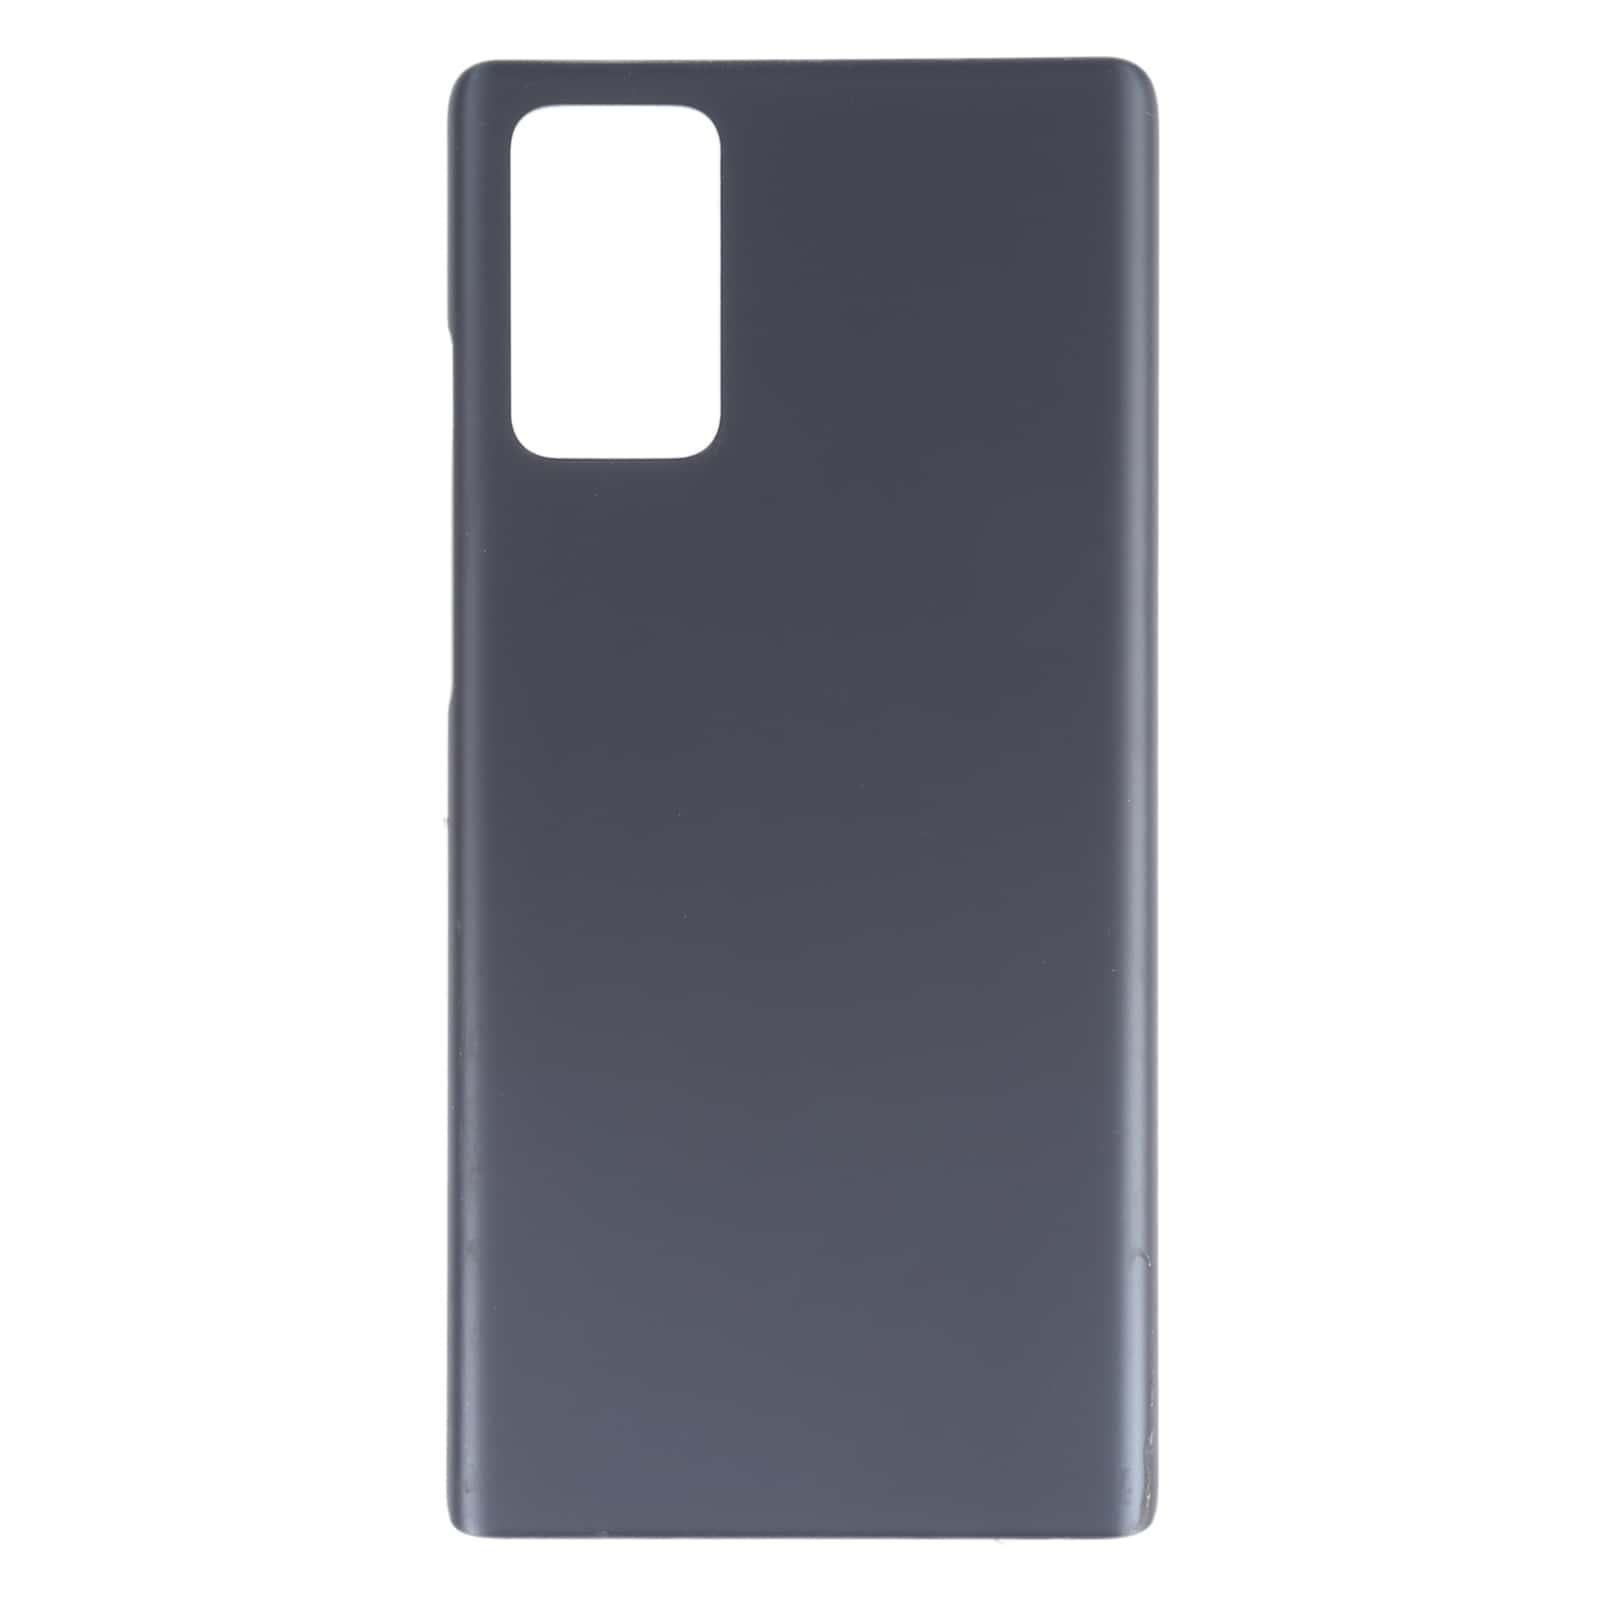 Back Glass Panel for  Samsung Galaxy Note20 5G Black